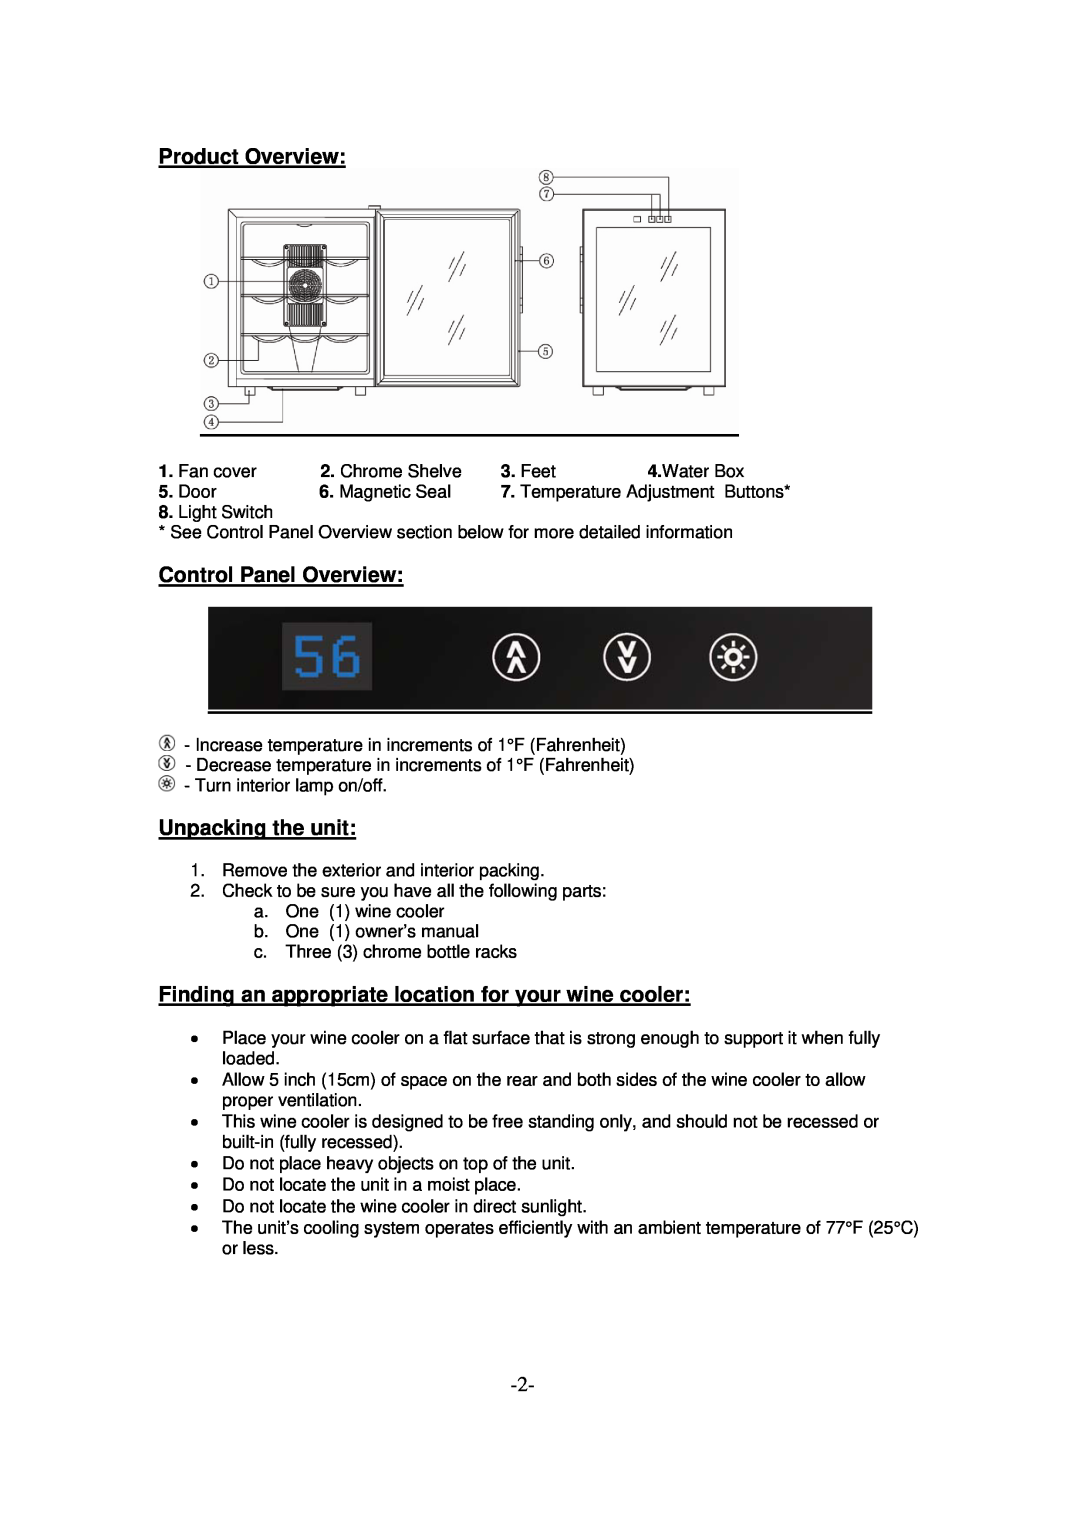 Emerson FR966 owner manual Product Overview, Control Panel Overview, Unpacking the unit 